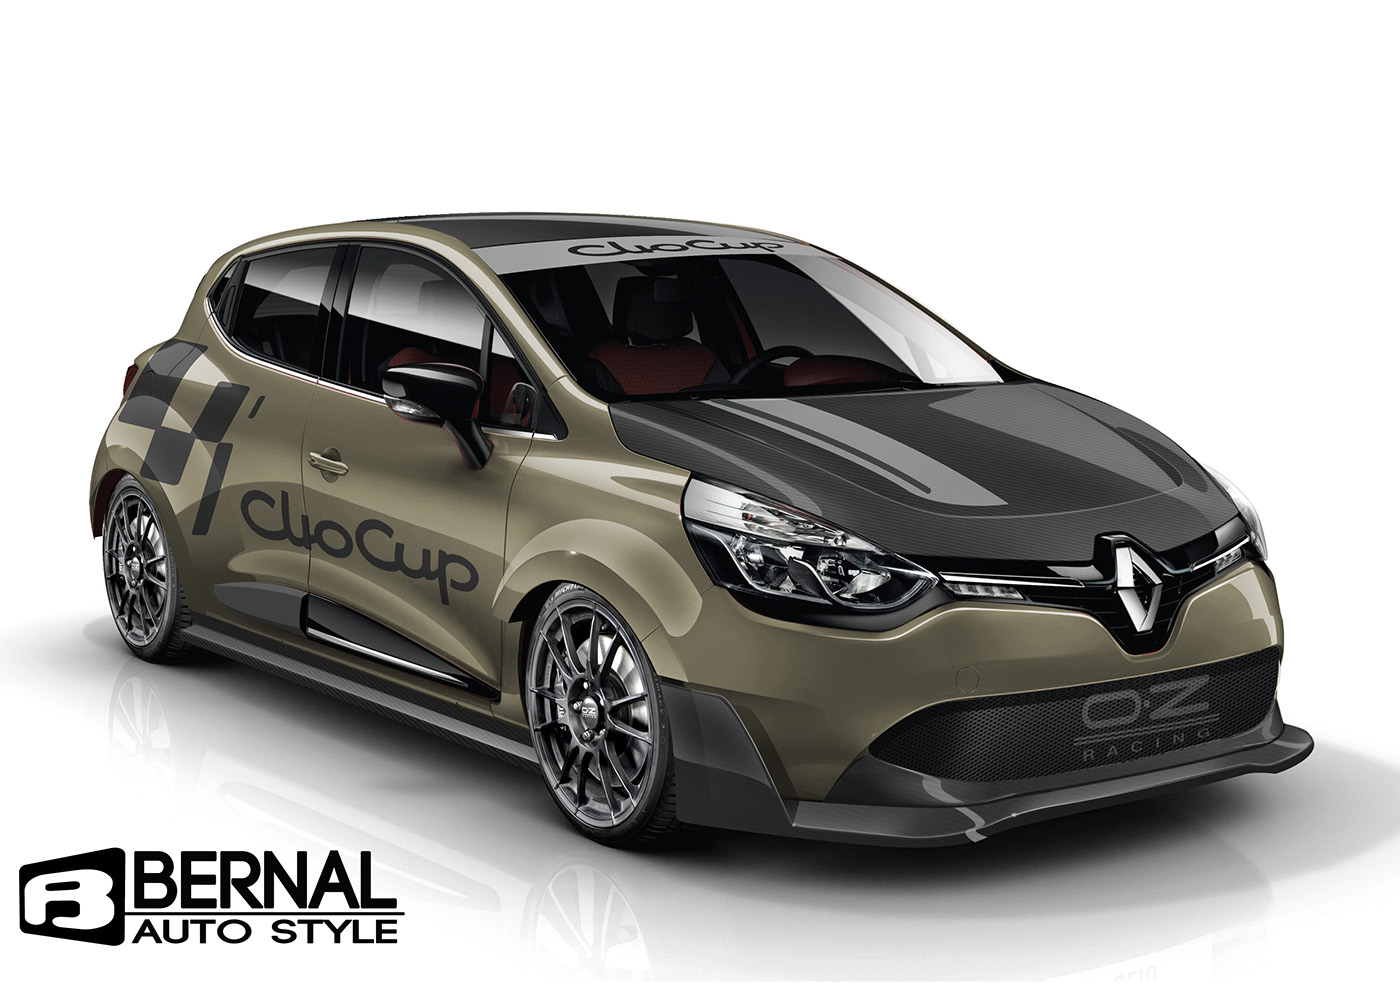 Renault Clio Cup Concept equipped with Full Wide Body Kit and multiple pain...